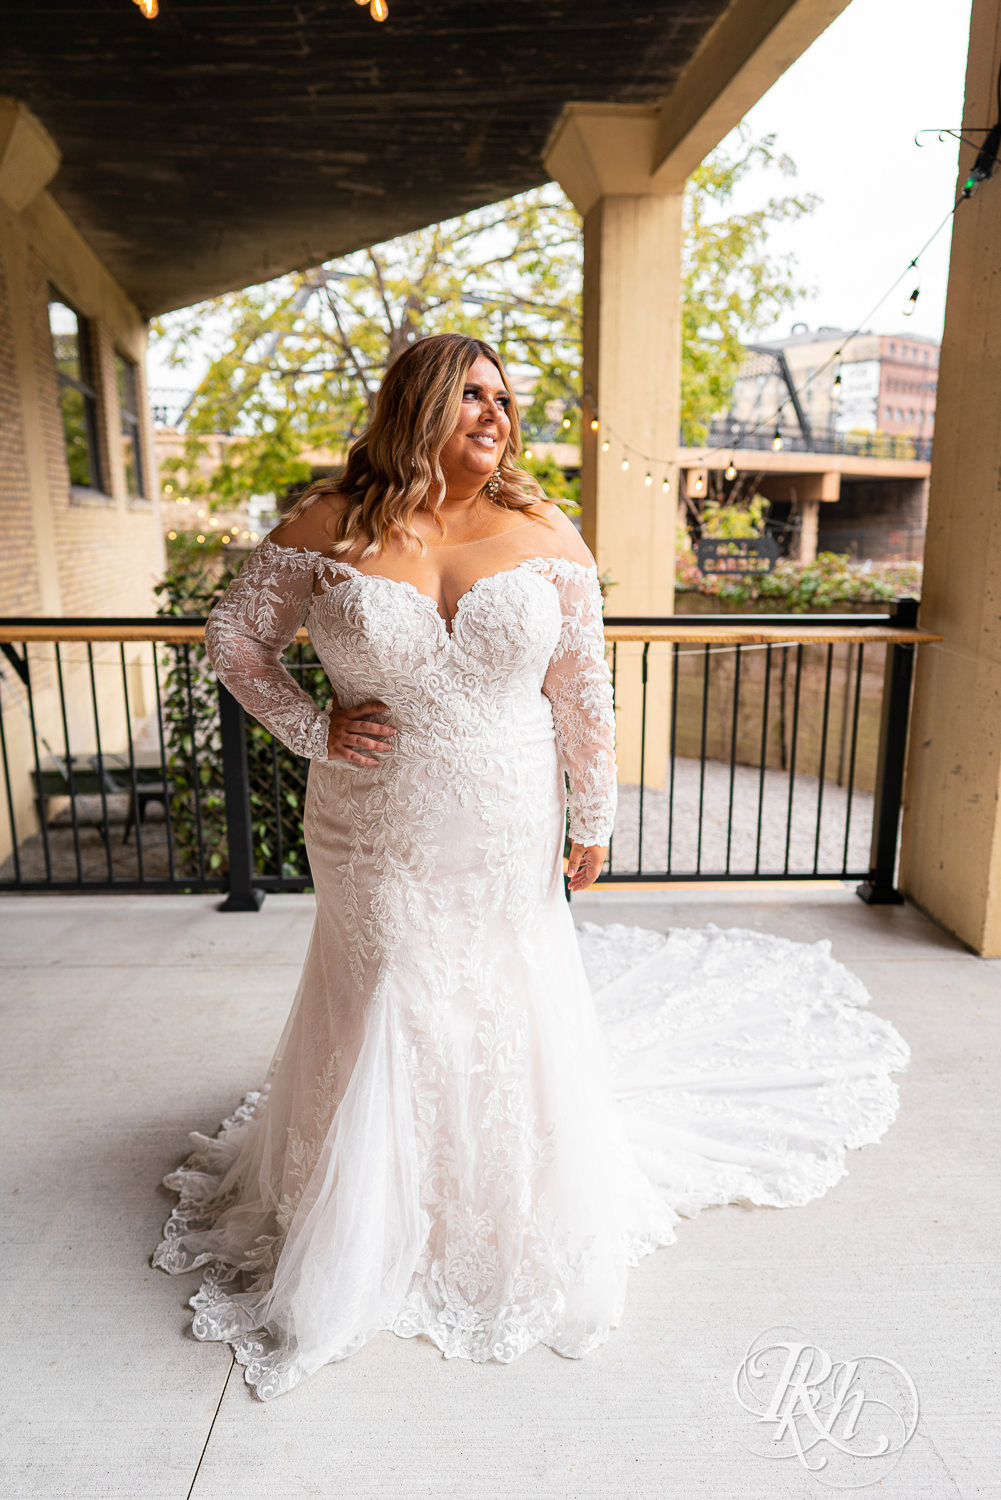 Plus size bride smiling in wedding dresses in Minneapolis, Minnesota with hand on hip.